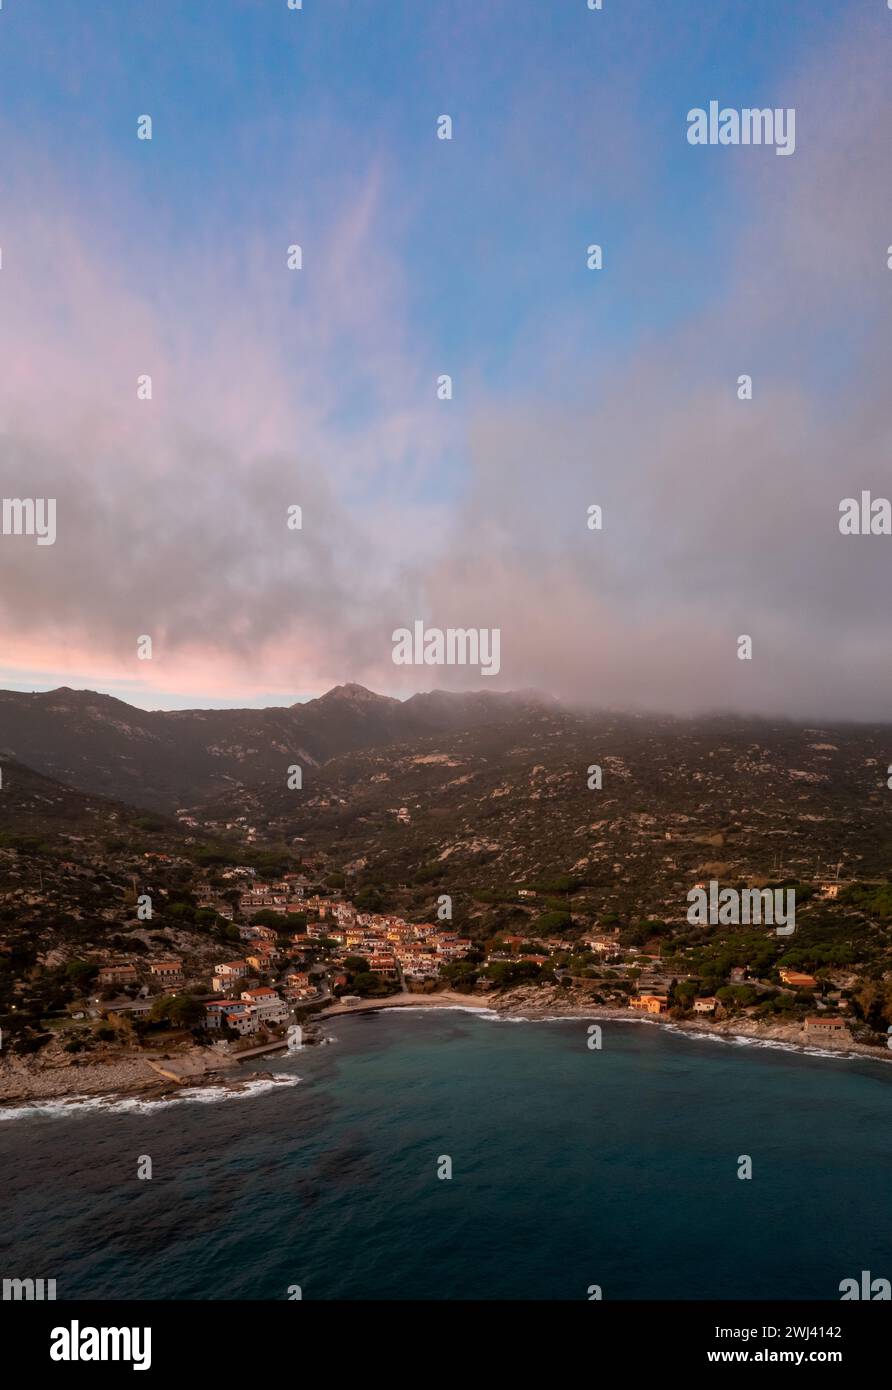 Drone view of Seccheto Beach and village on Elba Island just after sunset with a misty purple sky Stock Photo